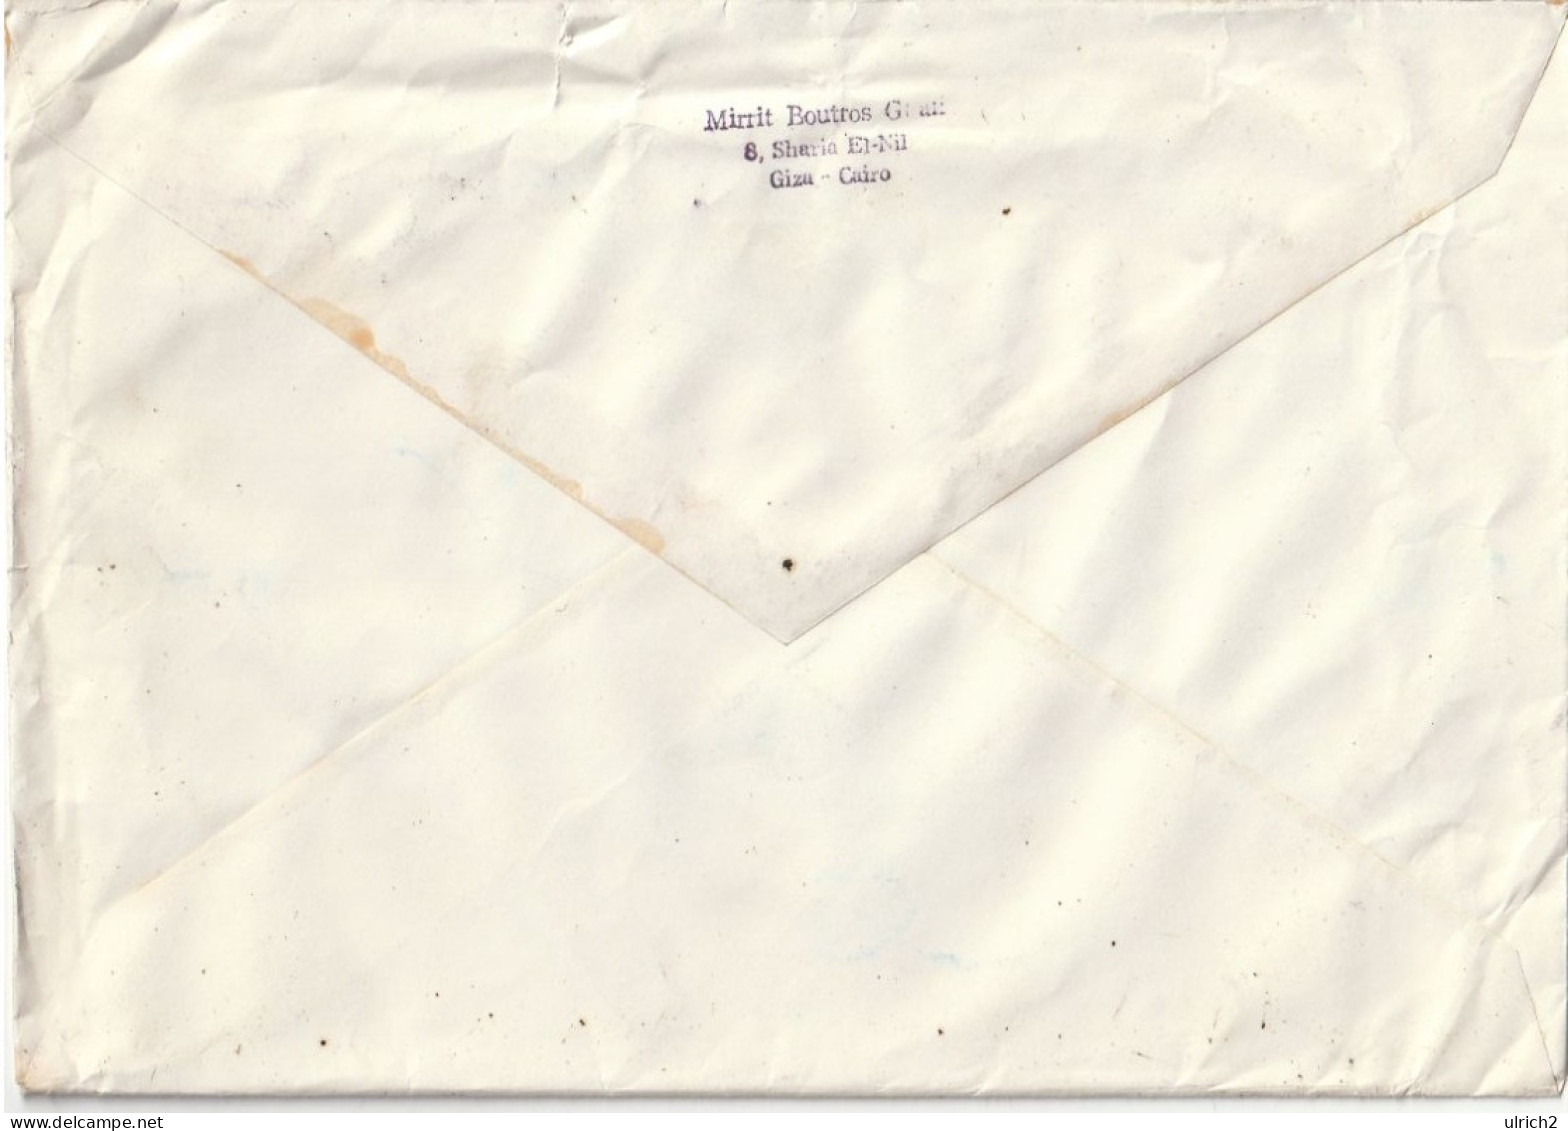 Airmail Letter - Ägypten - To Germany - Mirrit Boutros Ghali - 1978 (66977) - Covers & Documents